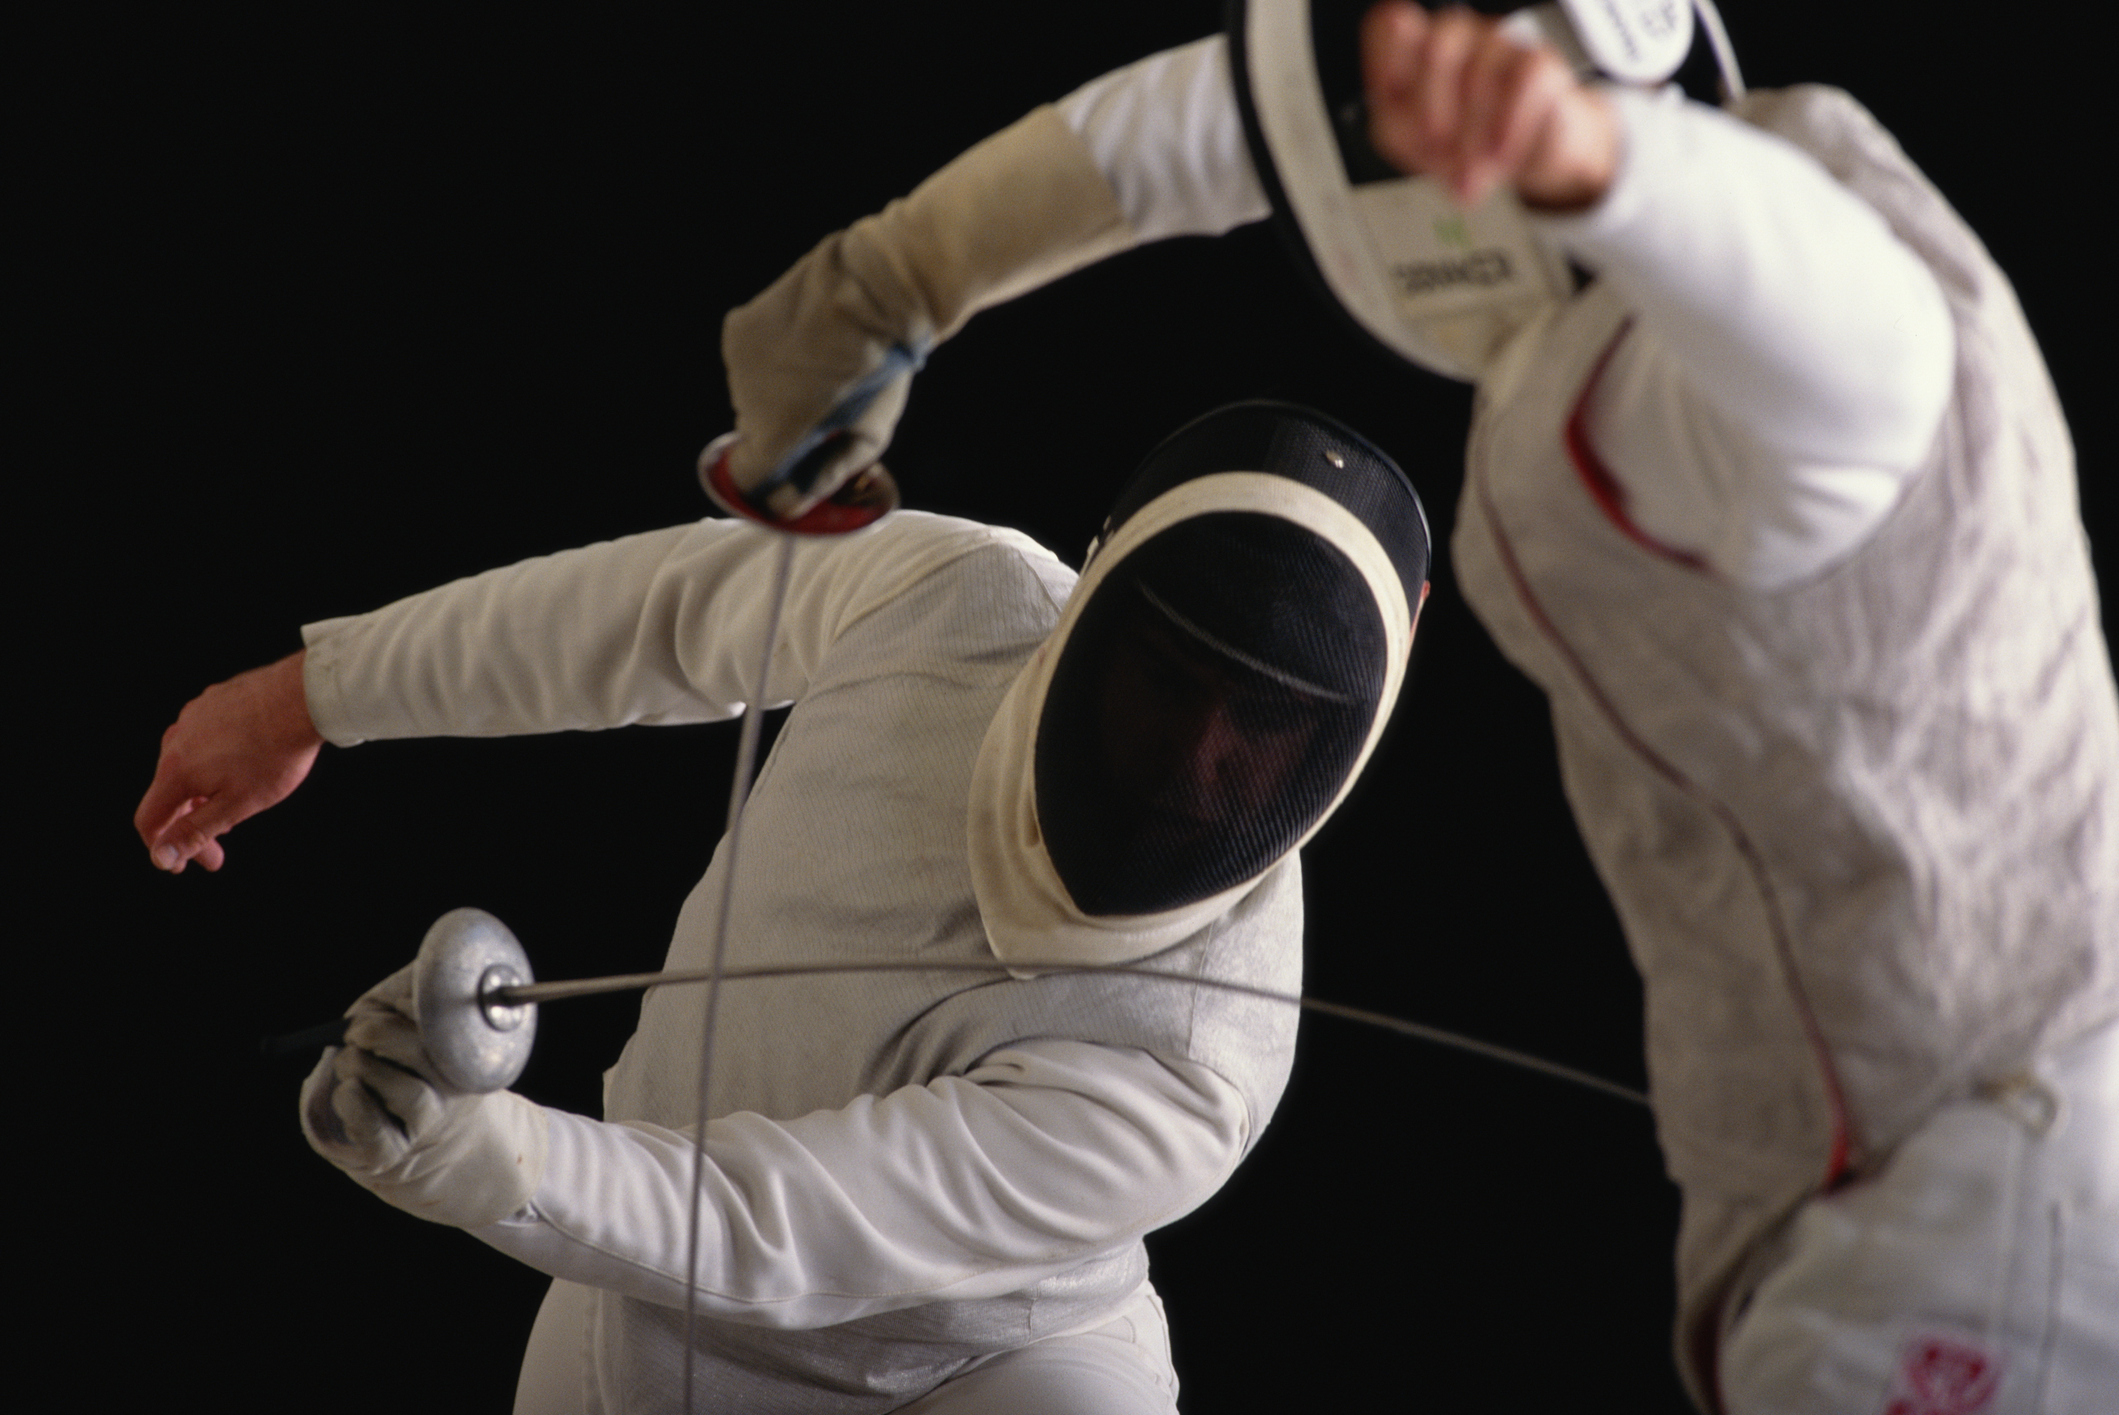 A fencing match between two competitors, both in fencing gear.